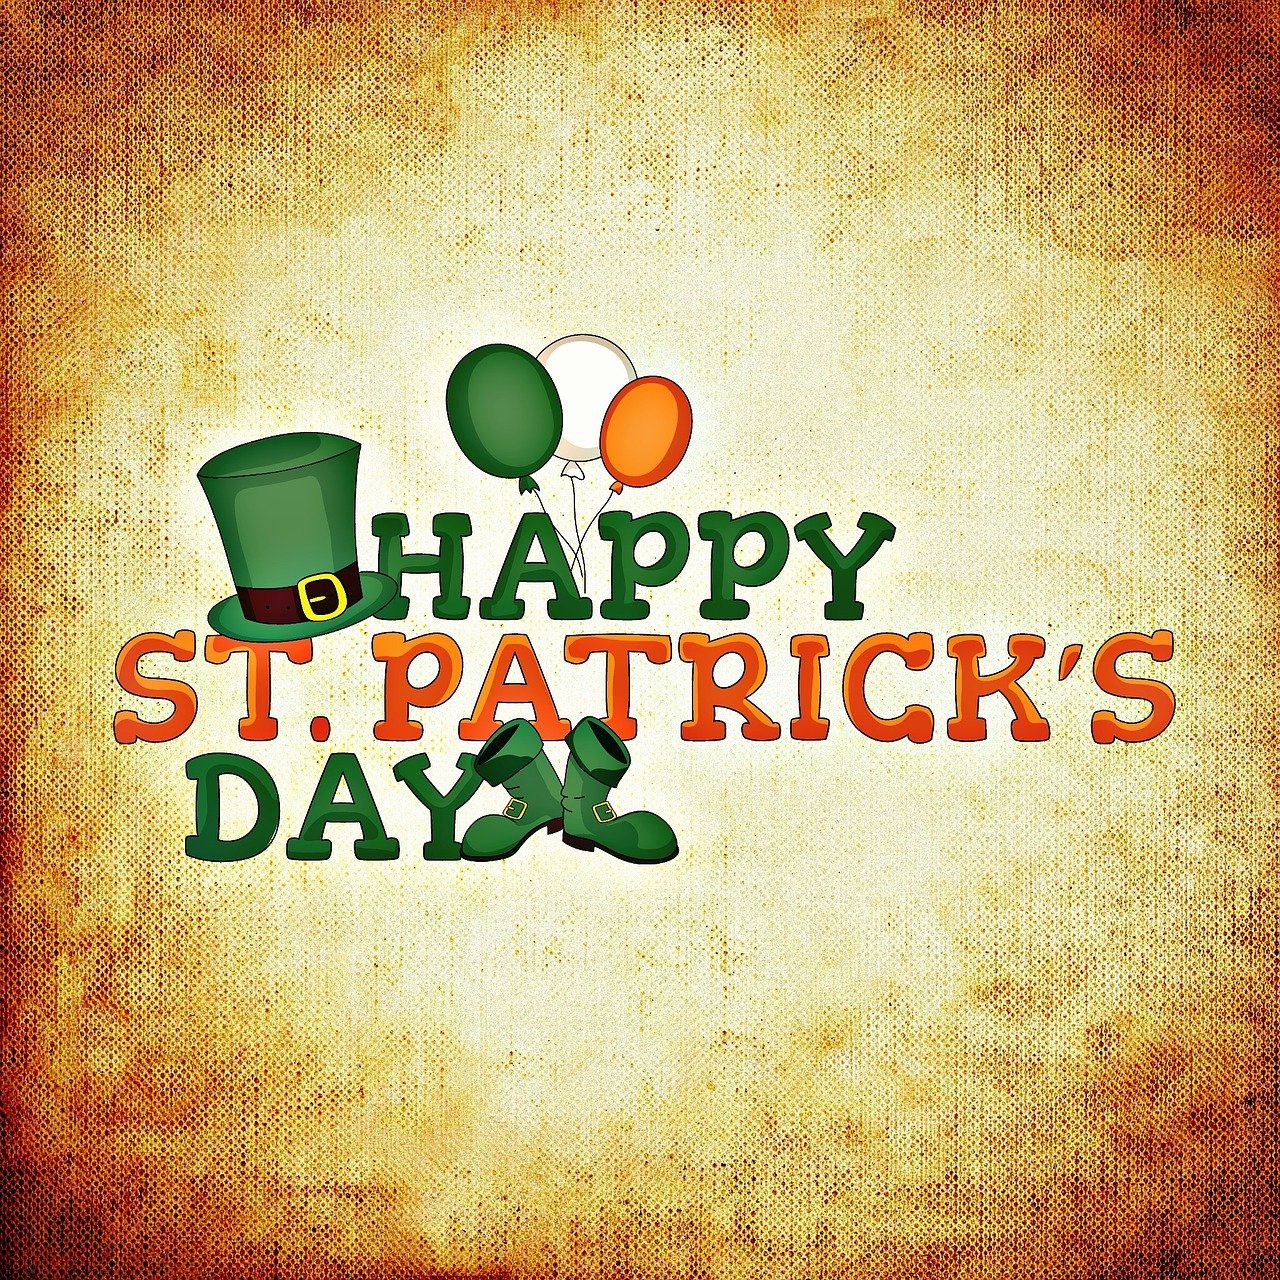 Marketing Ideas for St. Patrick’s Day